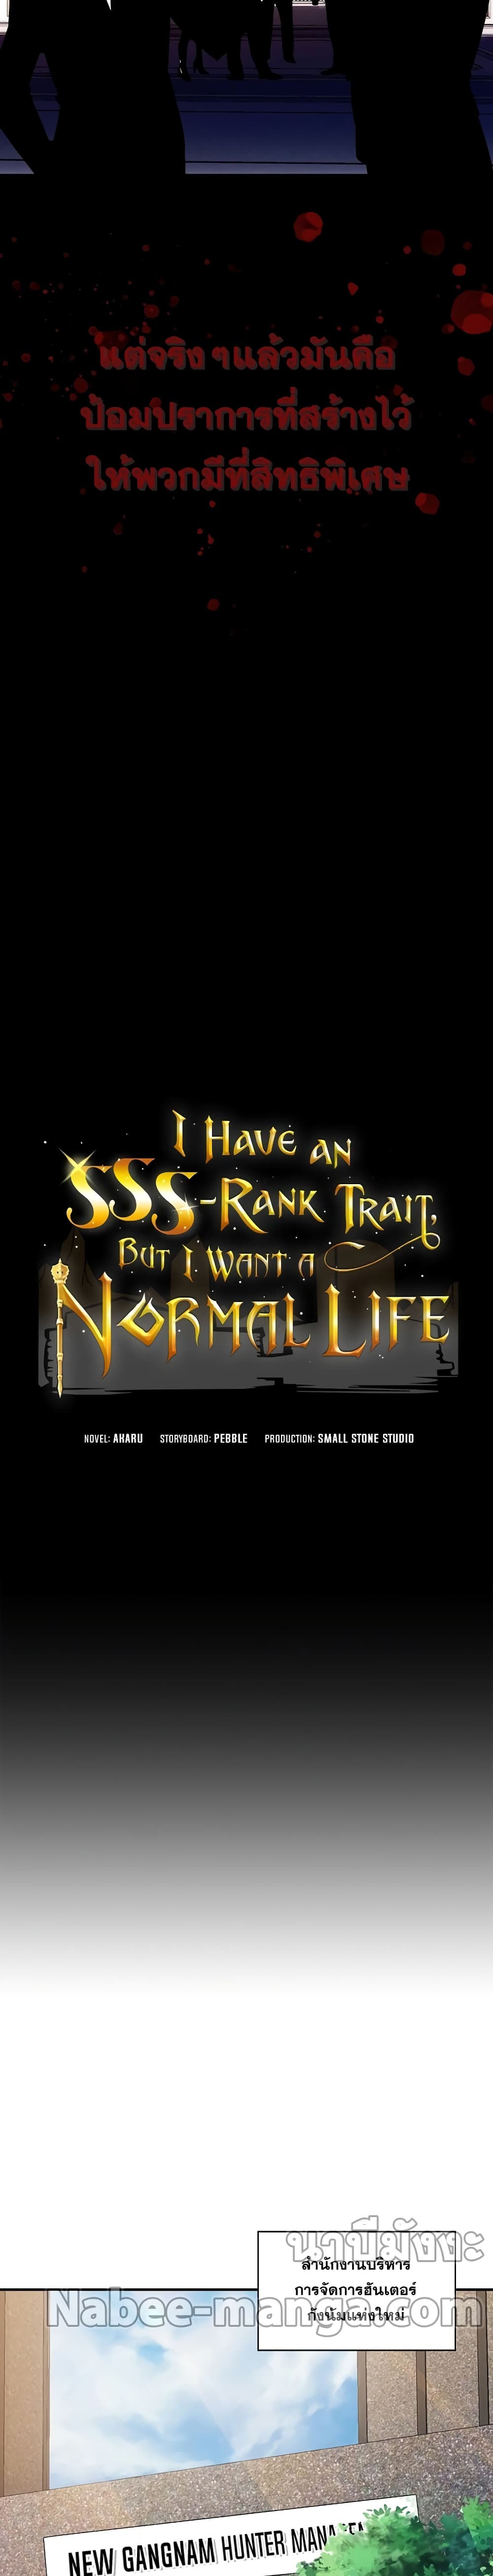 I Have an SSS-Rank Trait, But I Want a Normal Life 26-26